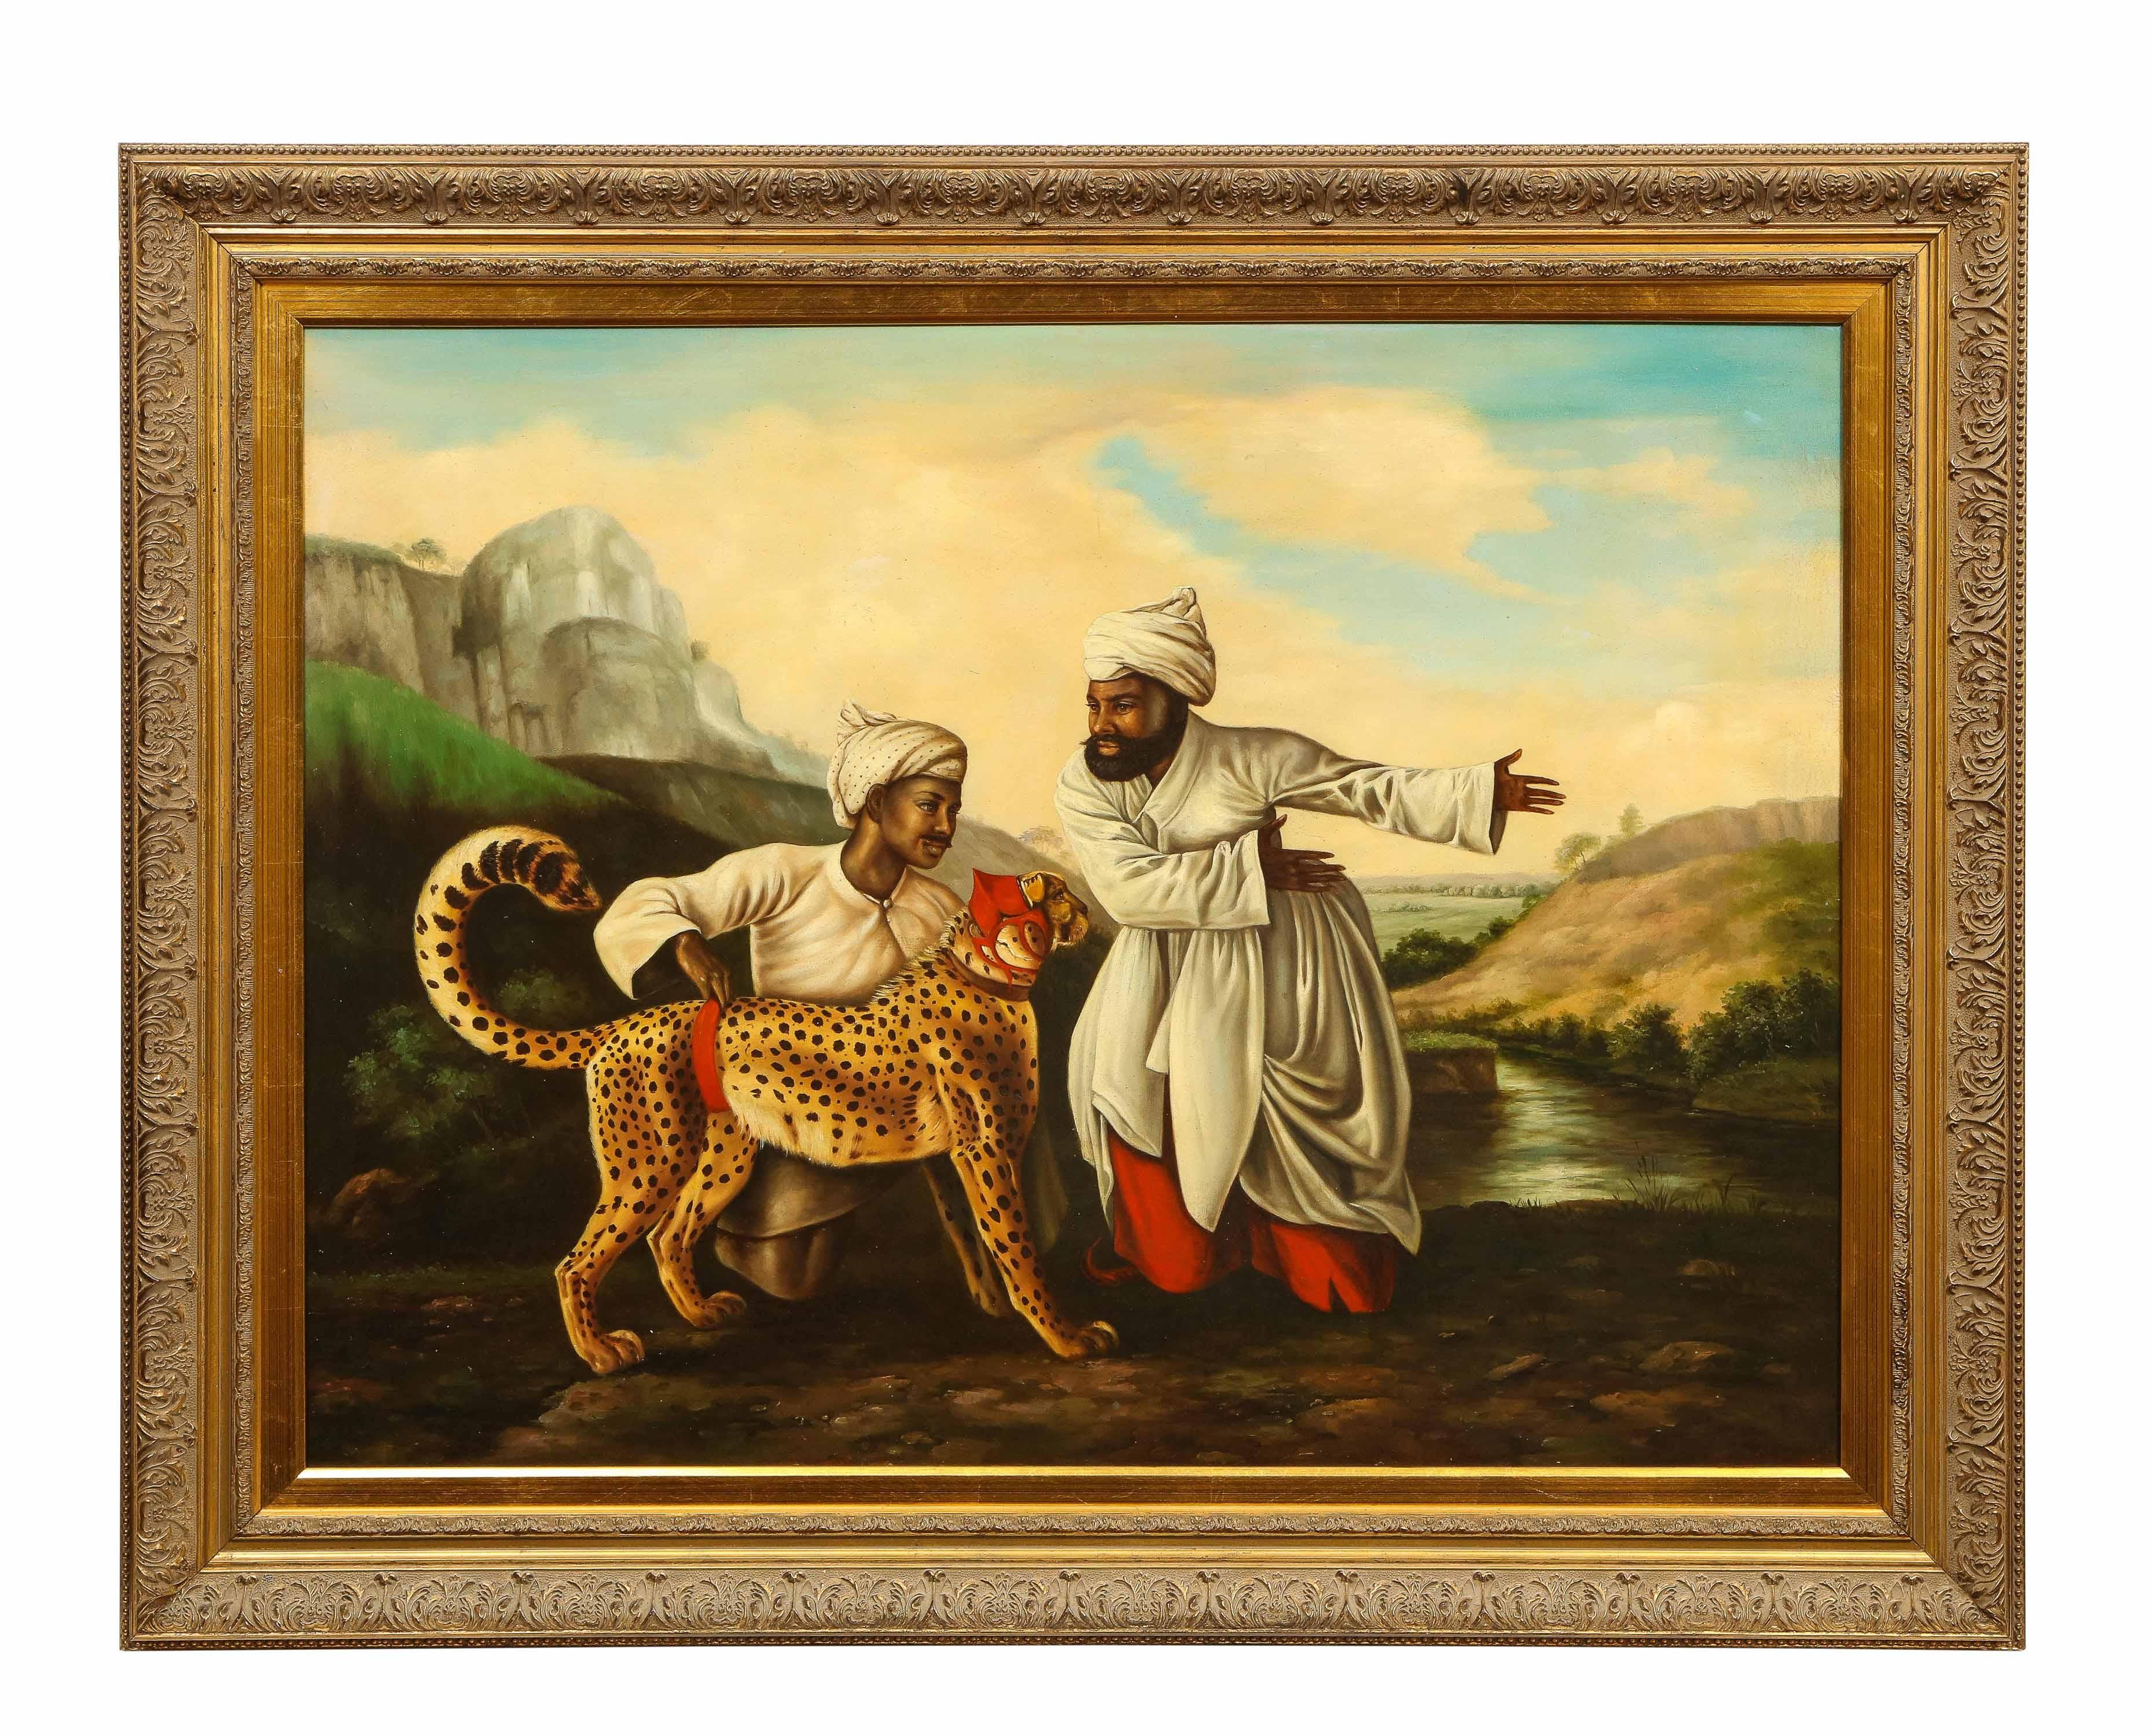 Unknown Figurative Painting - A Magnificent Orientalist Oil on Canvas Painting "Escorting The Cheetah"